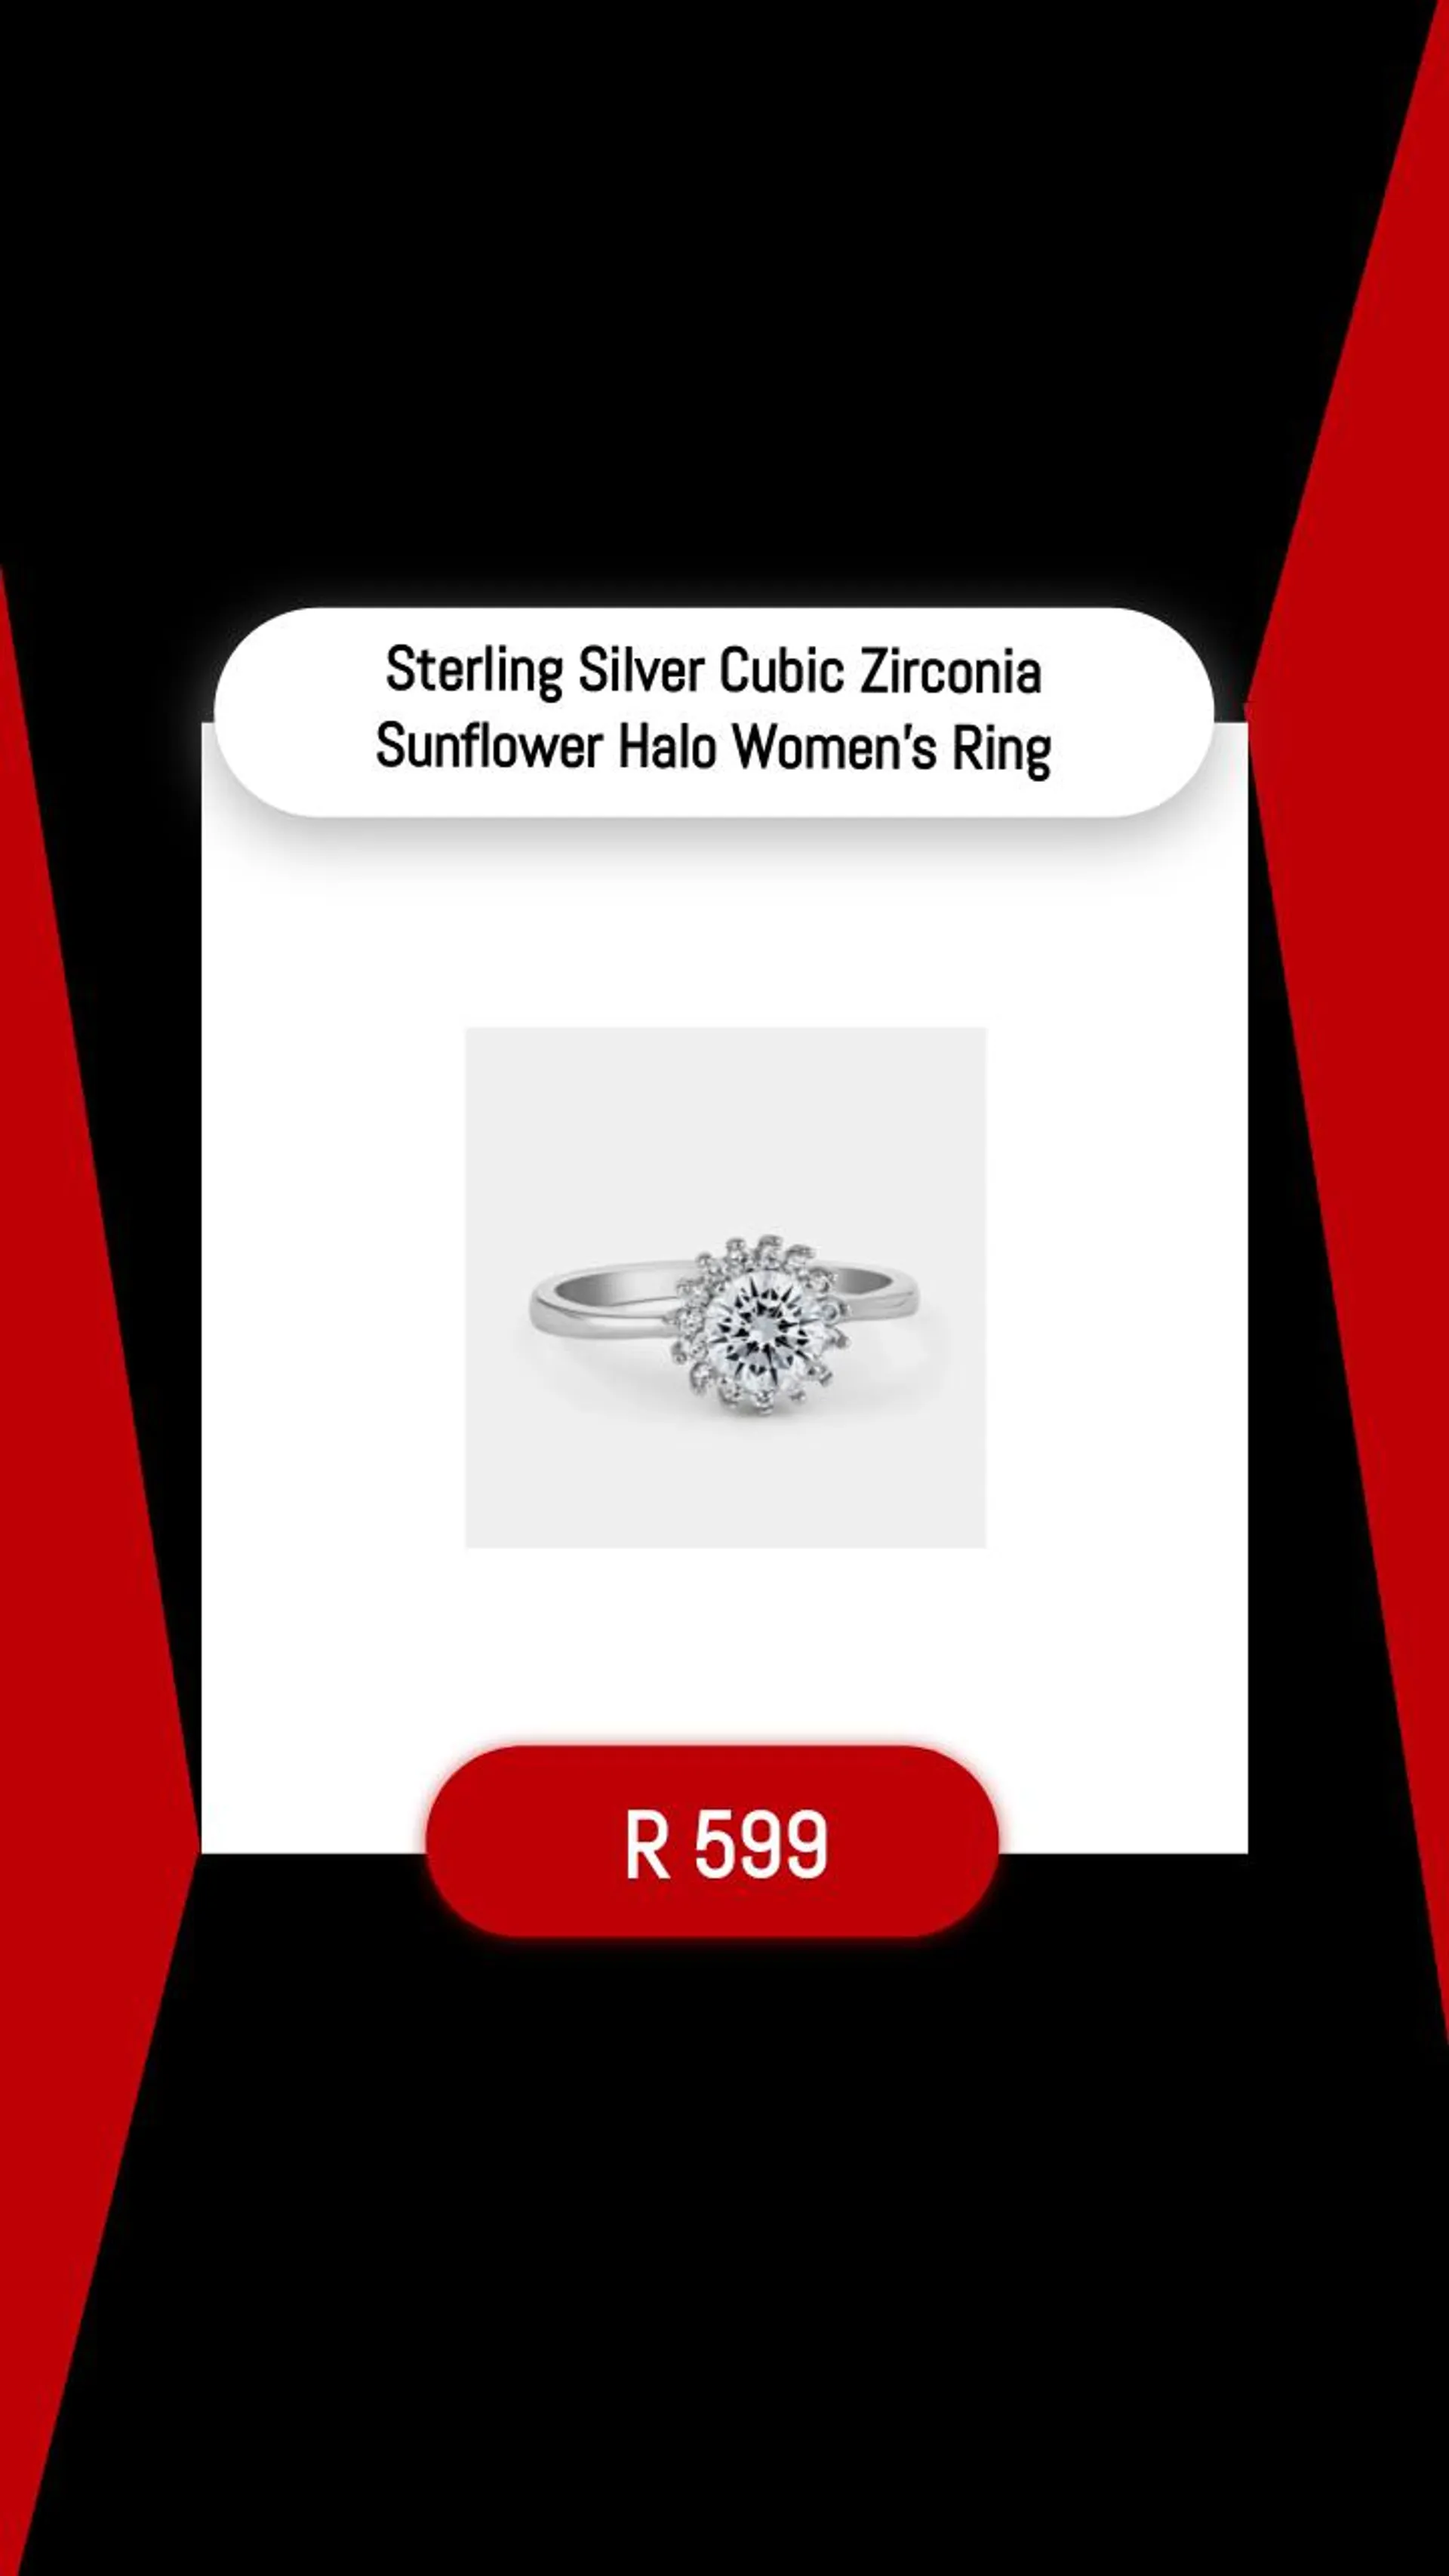 Sterling Silver Cubic Zirconia Sunflower Halo Women’s Ring